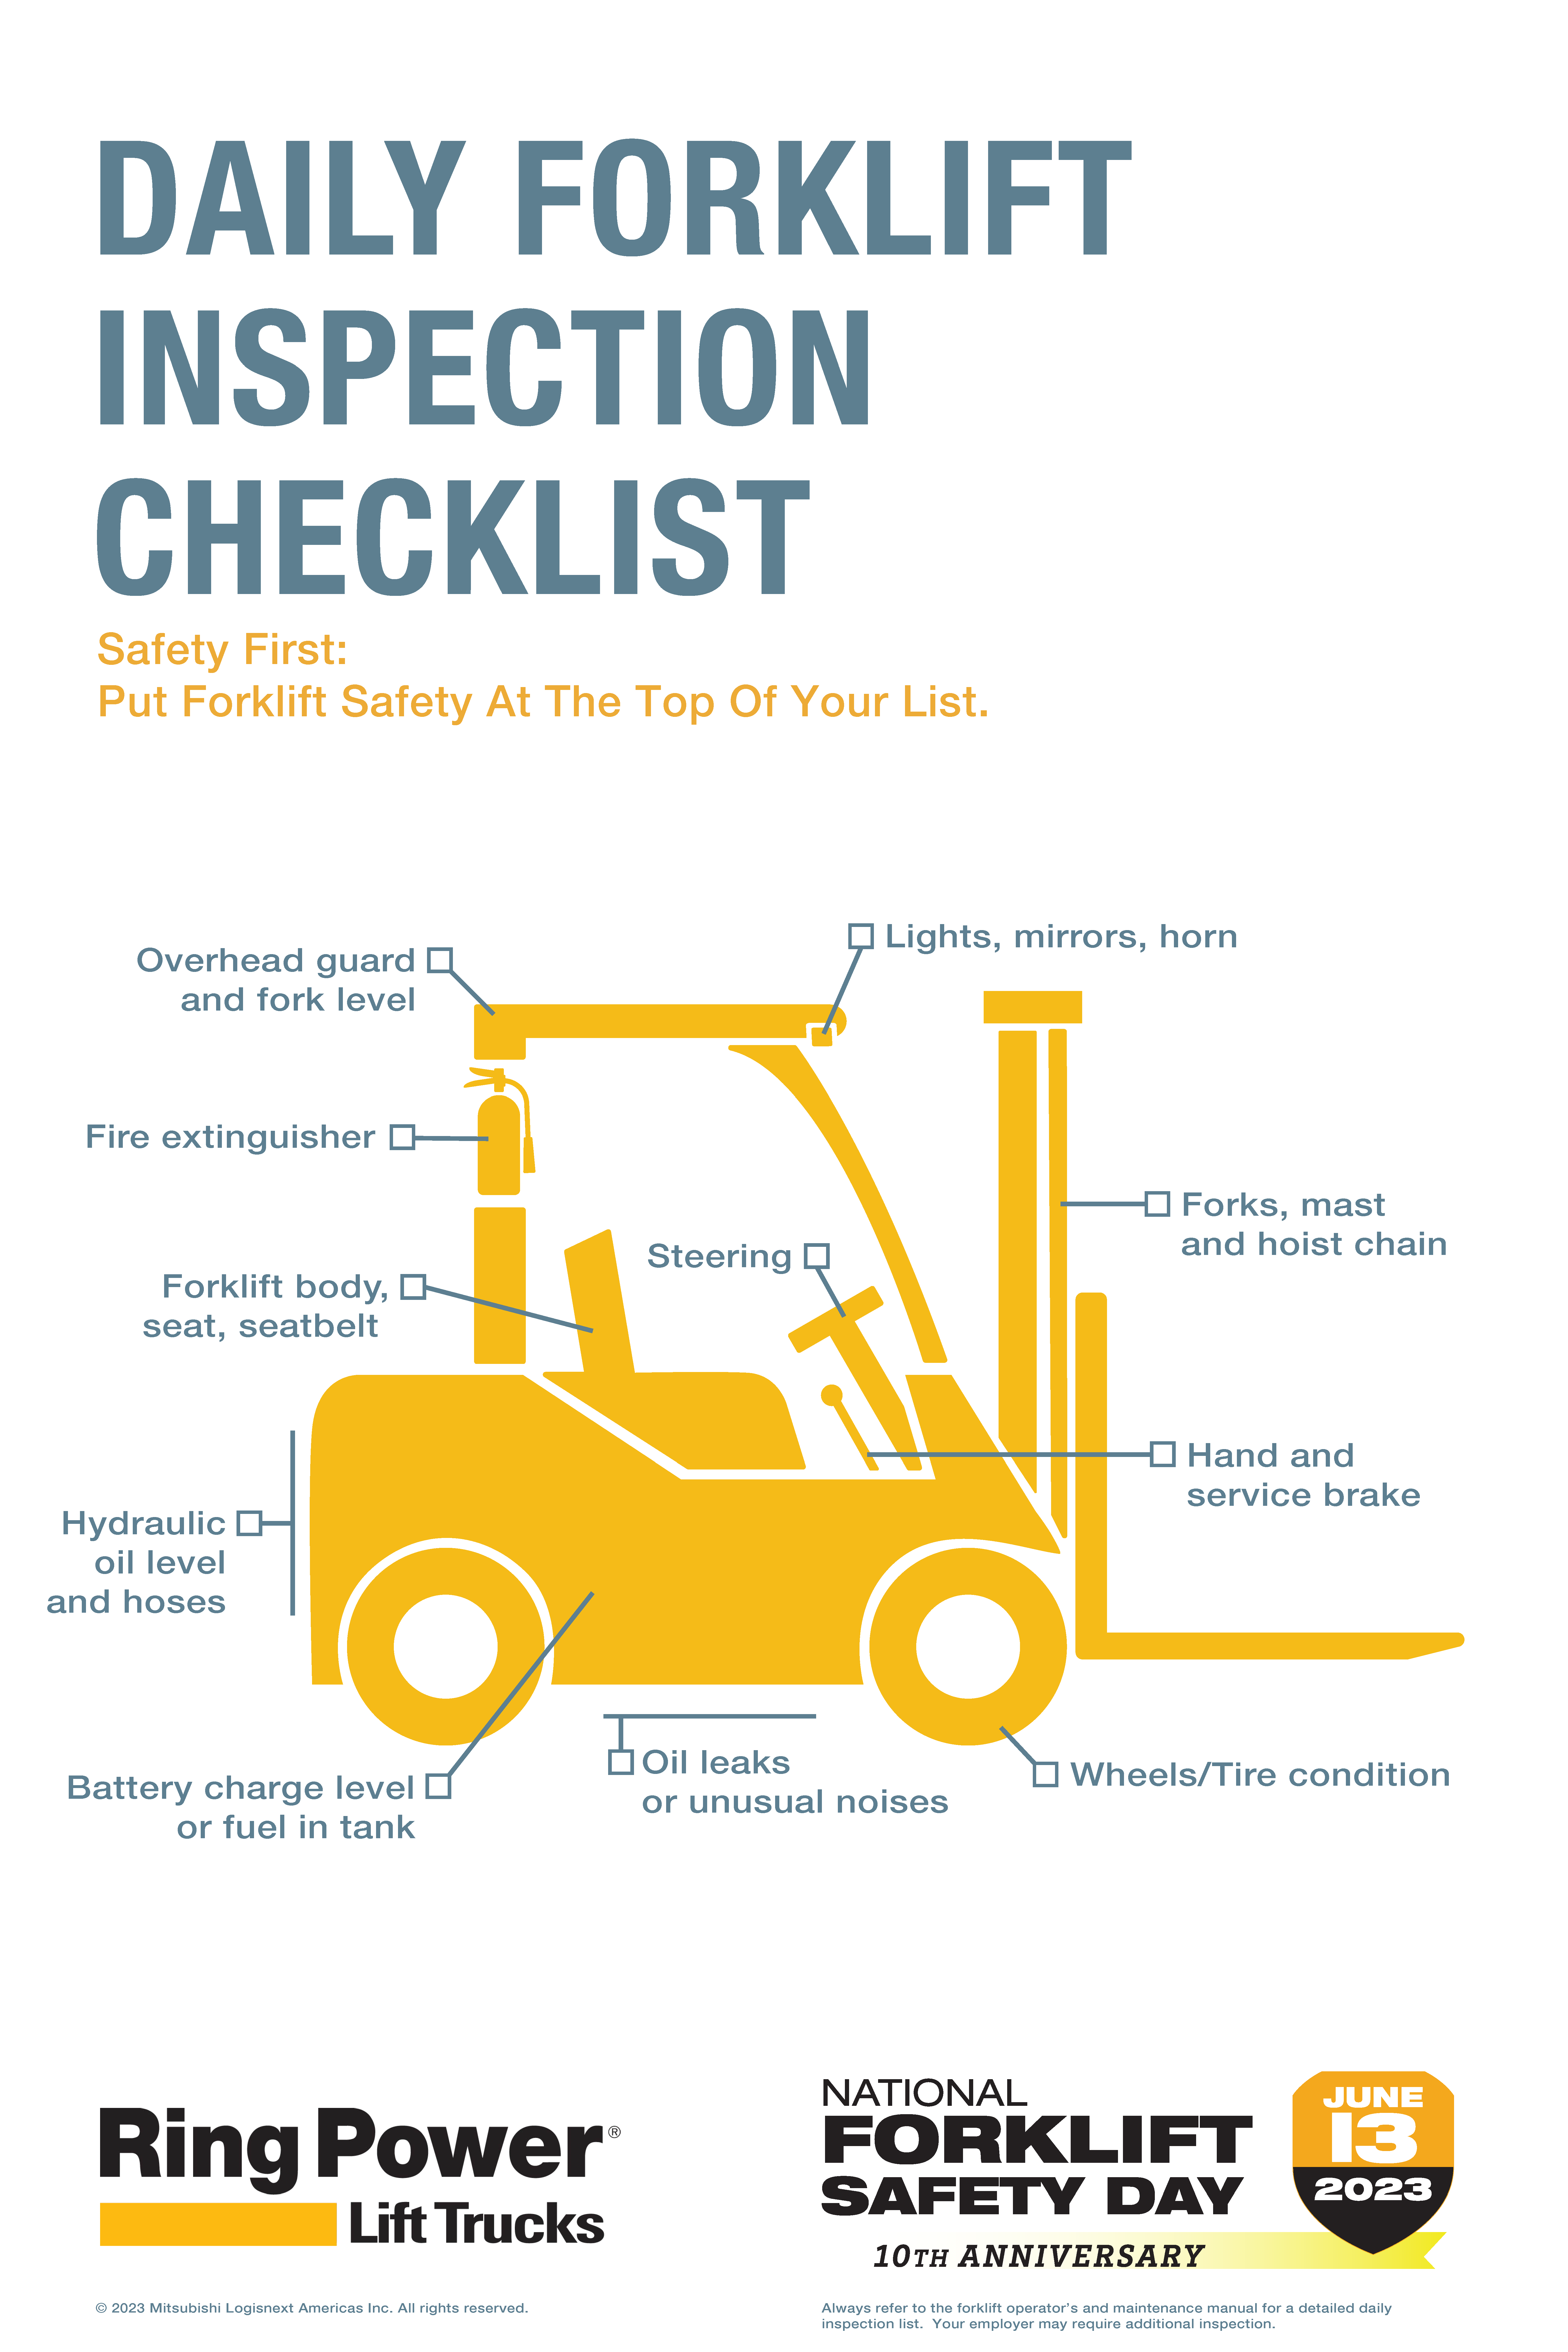 Daily forklift inspection checklist poster for National Forklift Safety Day June 2023